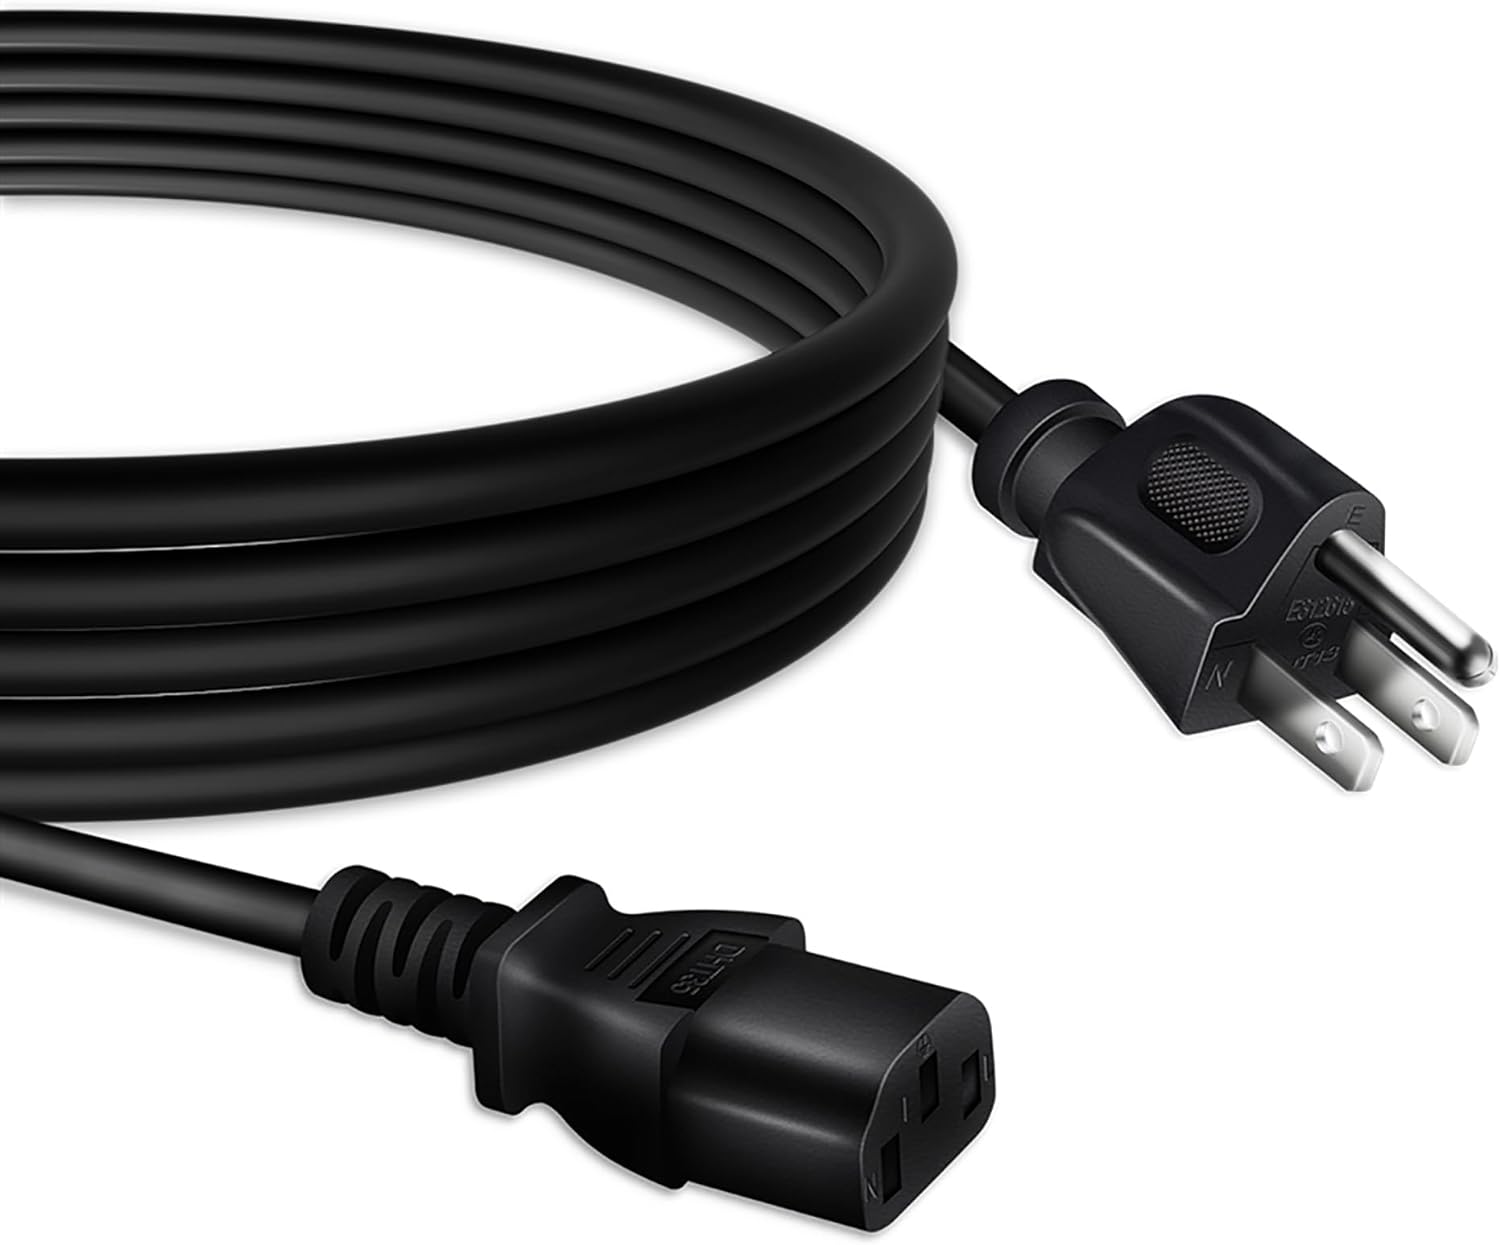 PKPOWER AC Power Cord Review